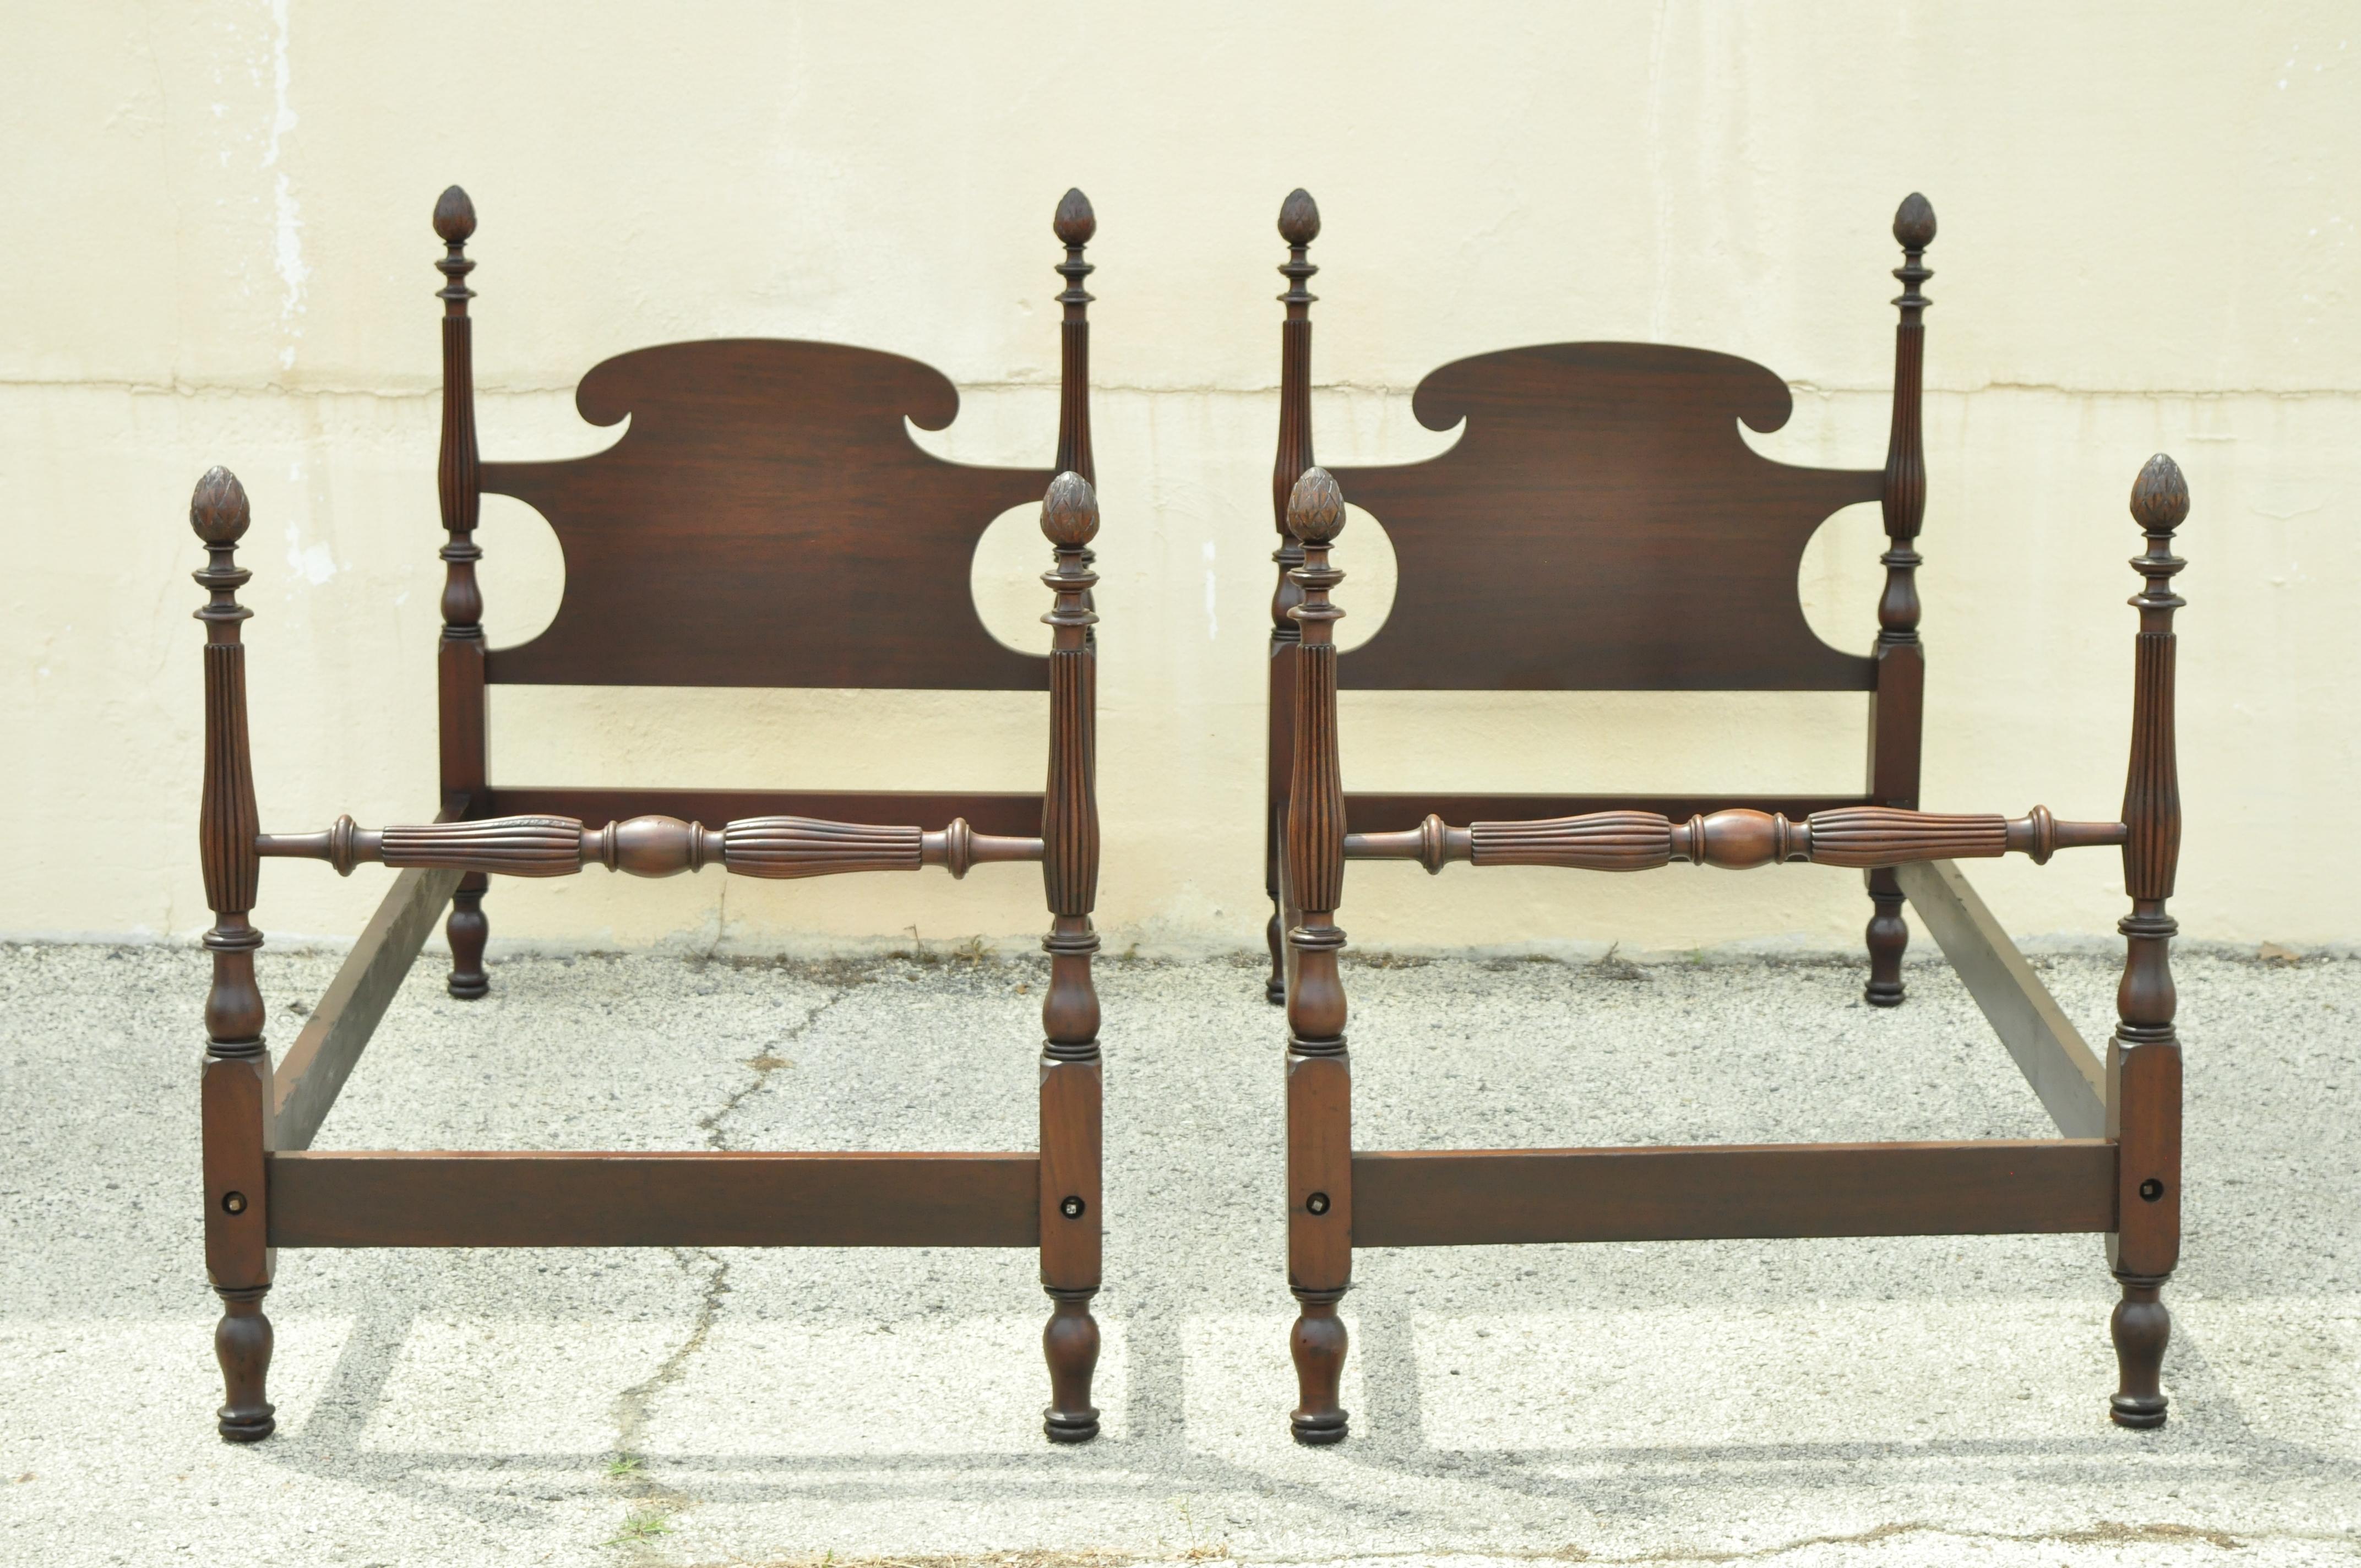 Pair of antique 4 poster mahogany twin single acorn pineapple finial bed frames. Item features bolted rails, tall carved acorn/pineapple finials, twin size frames, solid wood frame, beautiful wood grain, nicely carved details, very nice antique